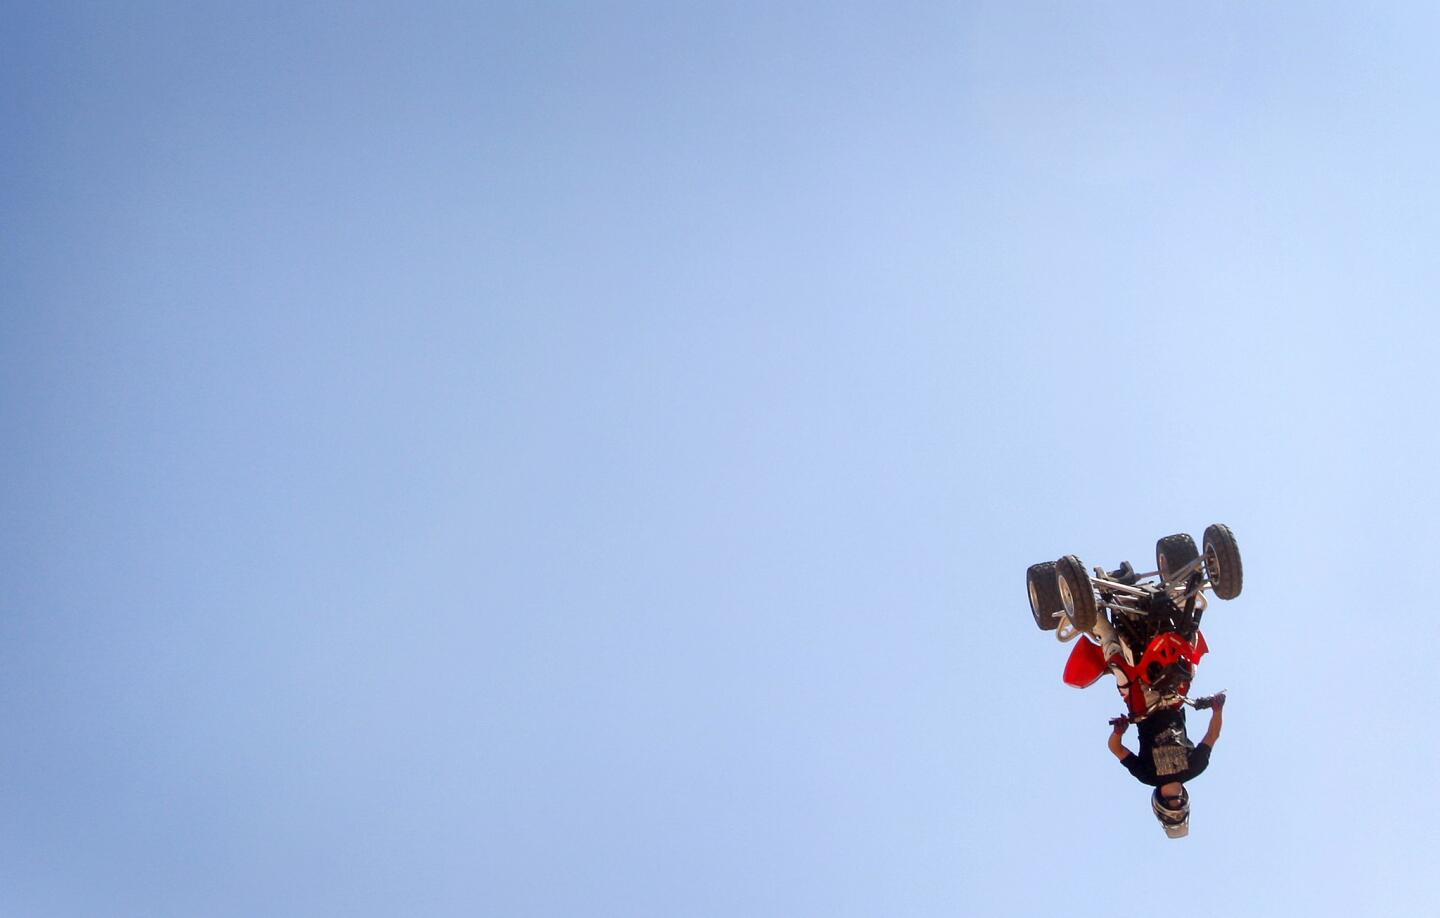 Caleb Moore performs on a quad bike during Burn Ciutatthe de Palma exhibition on the Spanish island of Mallorca in 2008. Moore was killed when he crahed his snowmobile during competition at the Winter X-Games. He was 25.